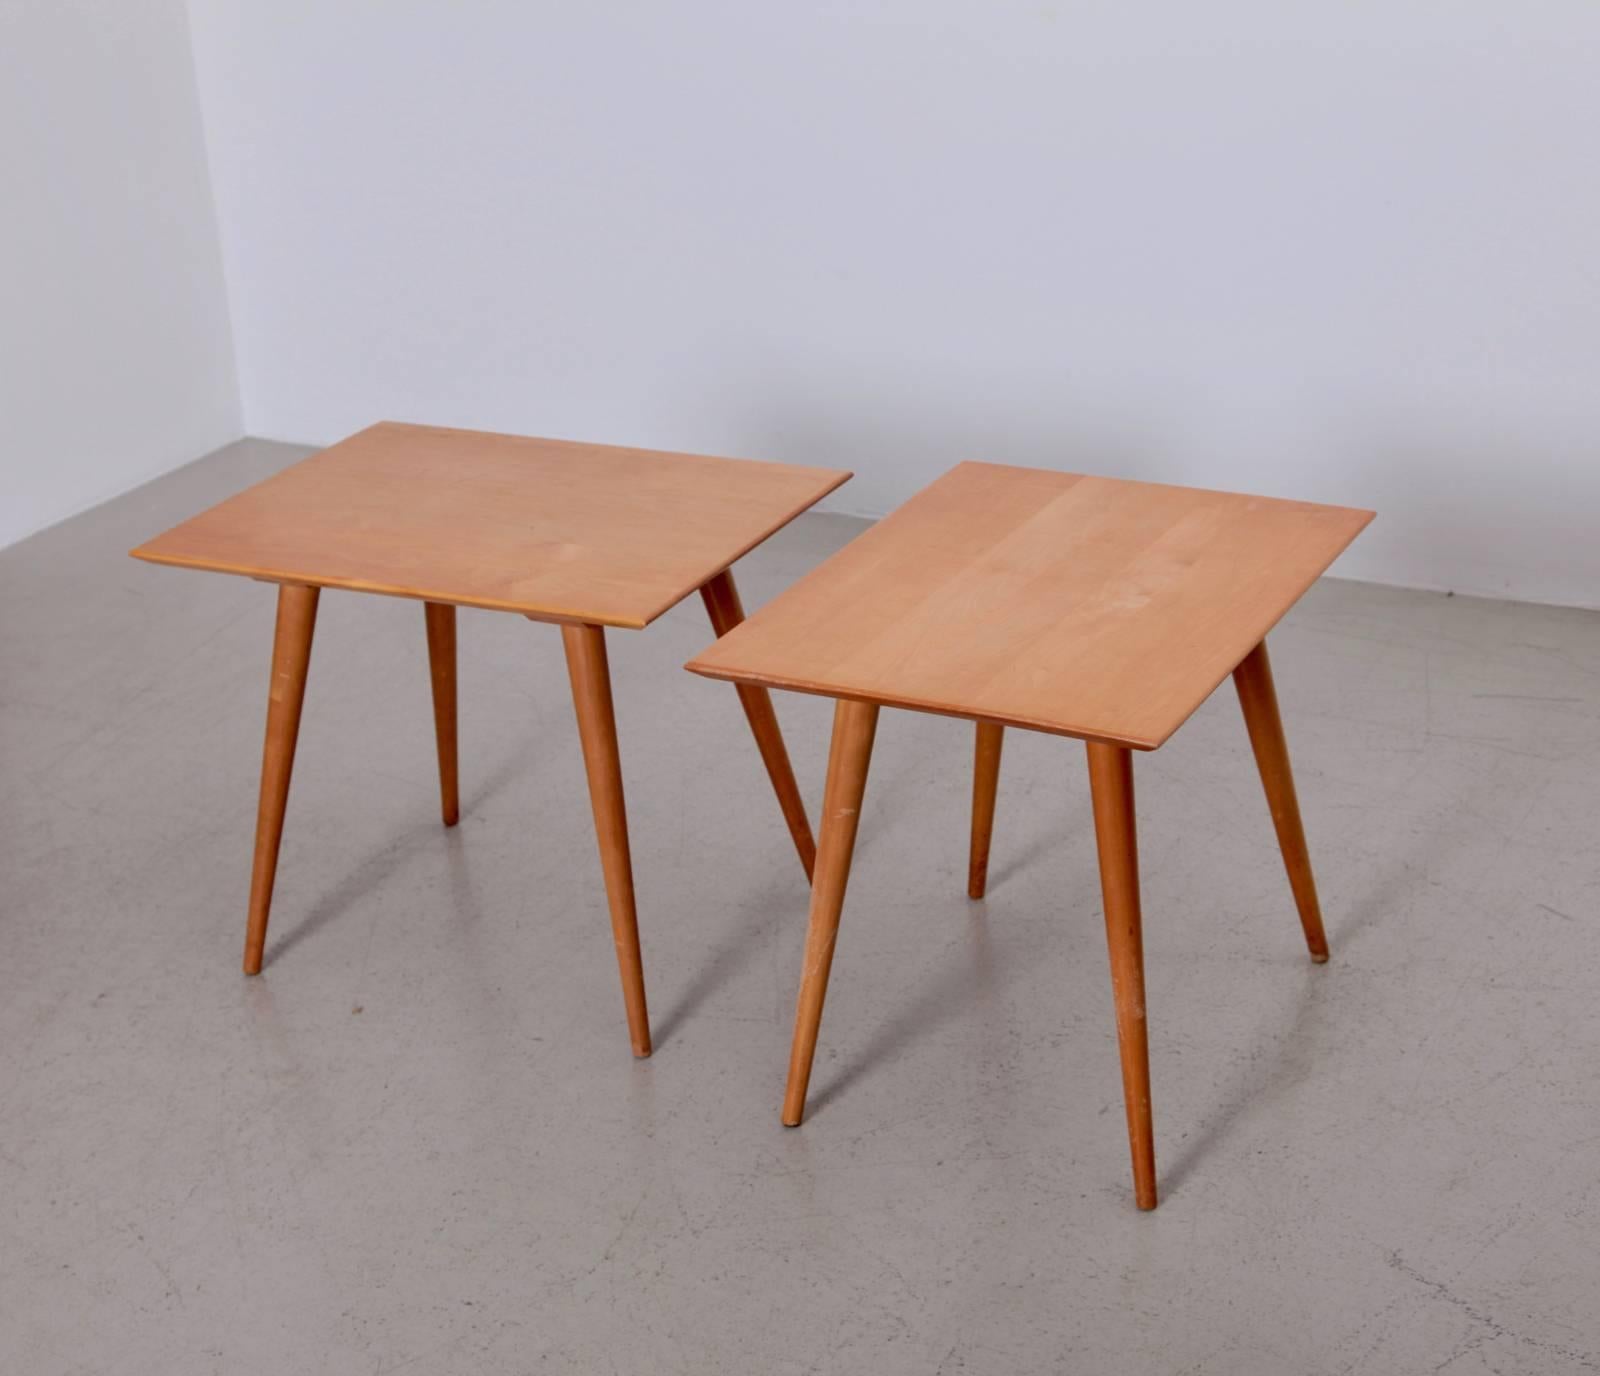 Nice pair of blonde Paul McCobb Planner group side tables.
A McCobb Classic. Very good original condition.

